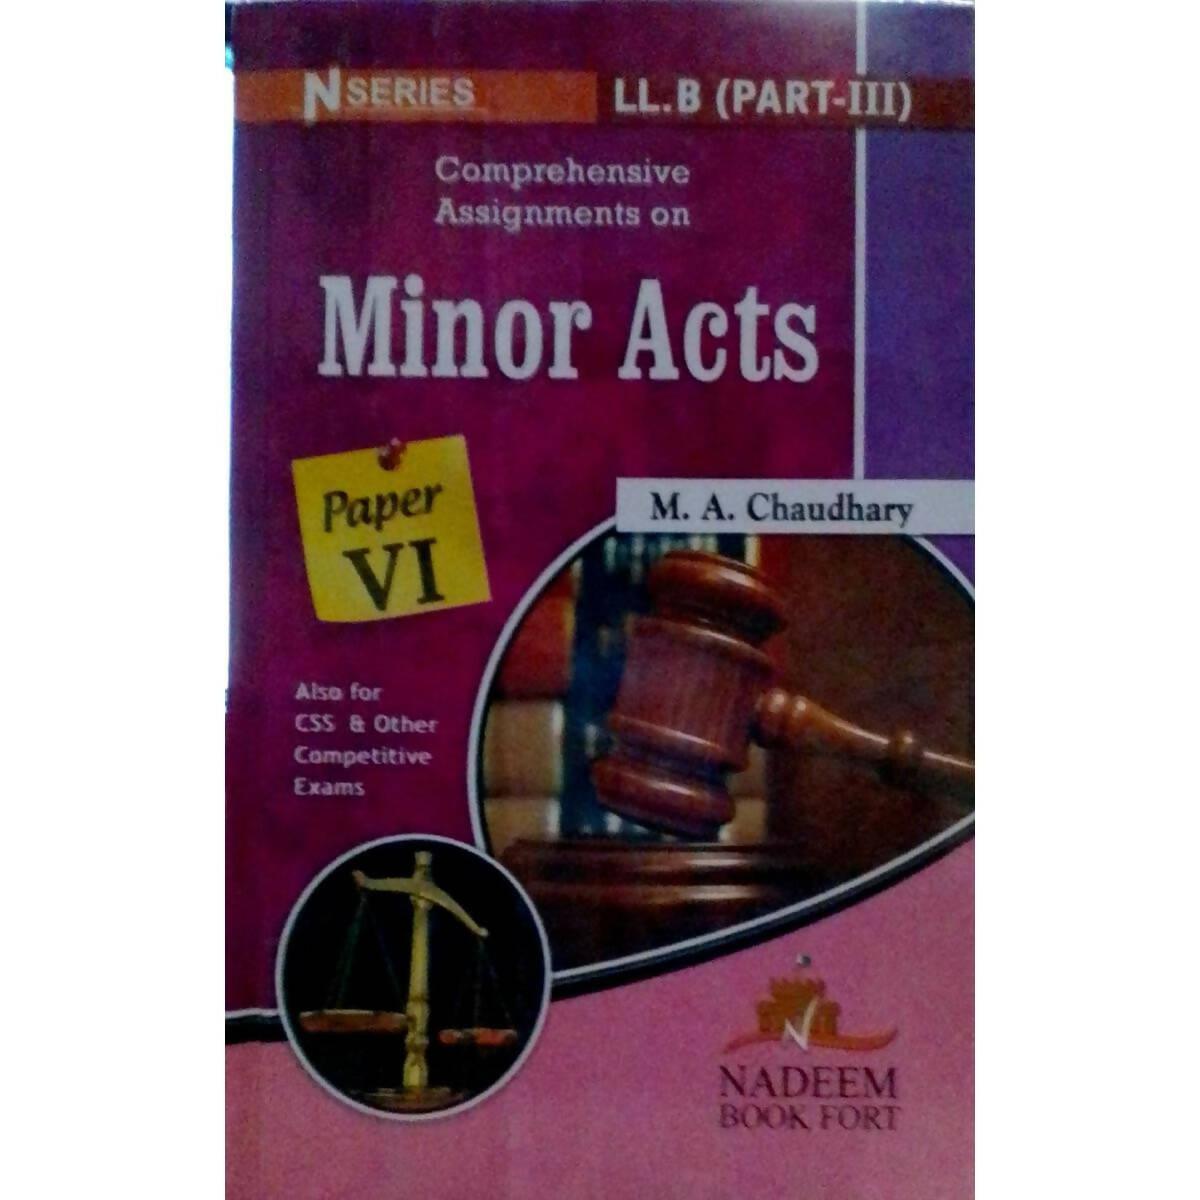 Minor Acts M A Chaudhary LLB - ValueBox